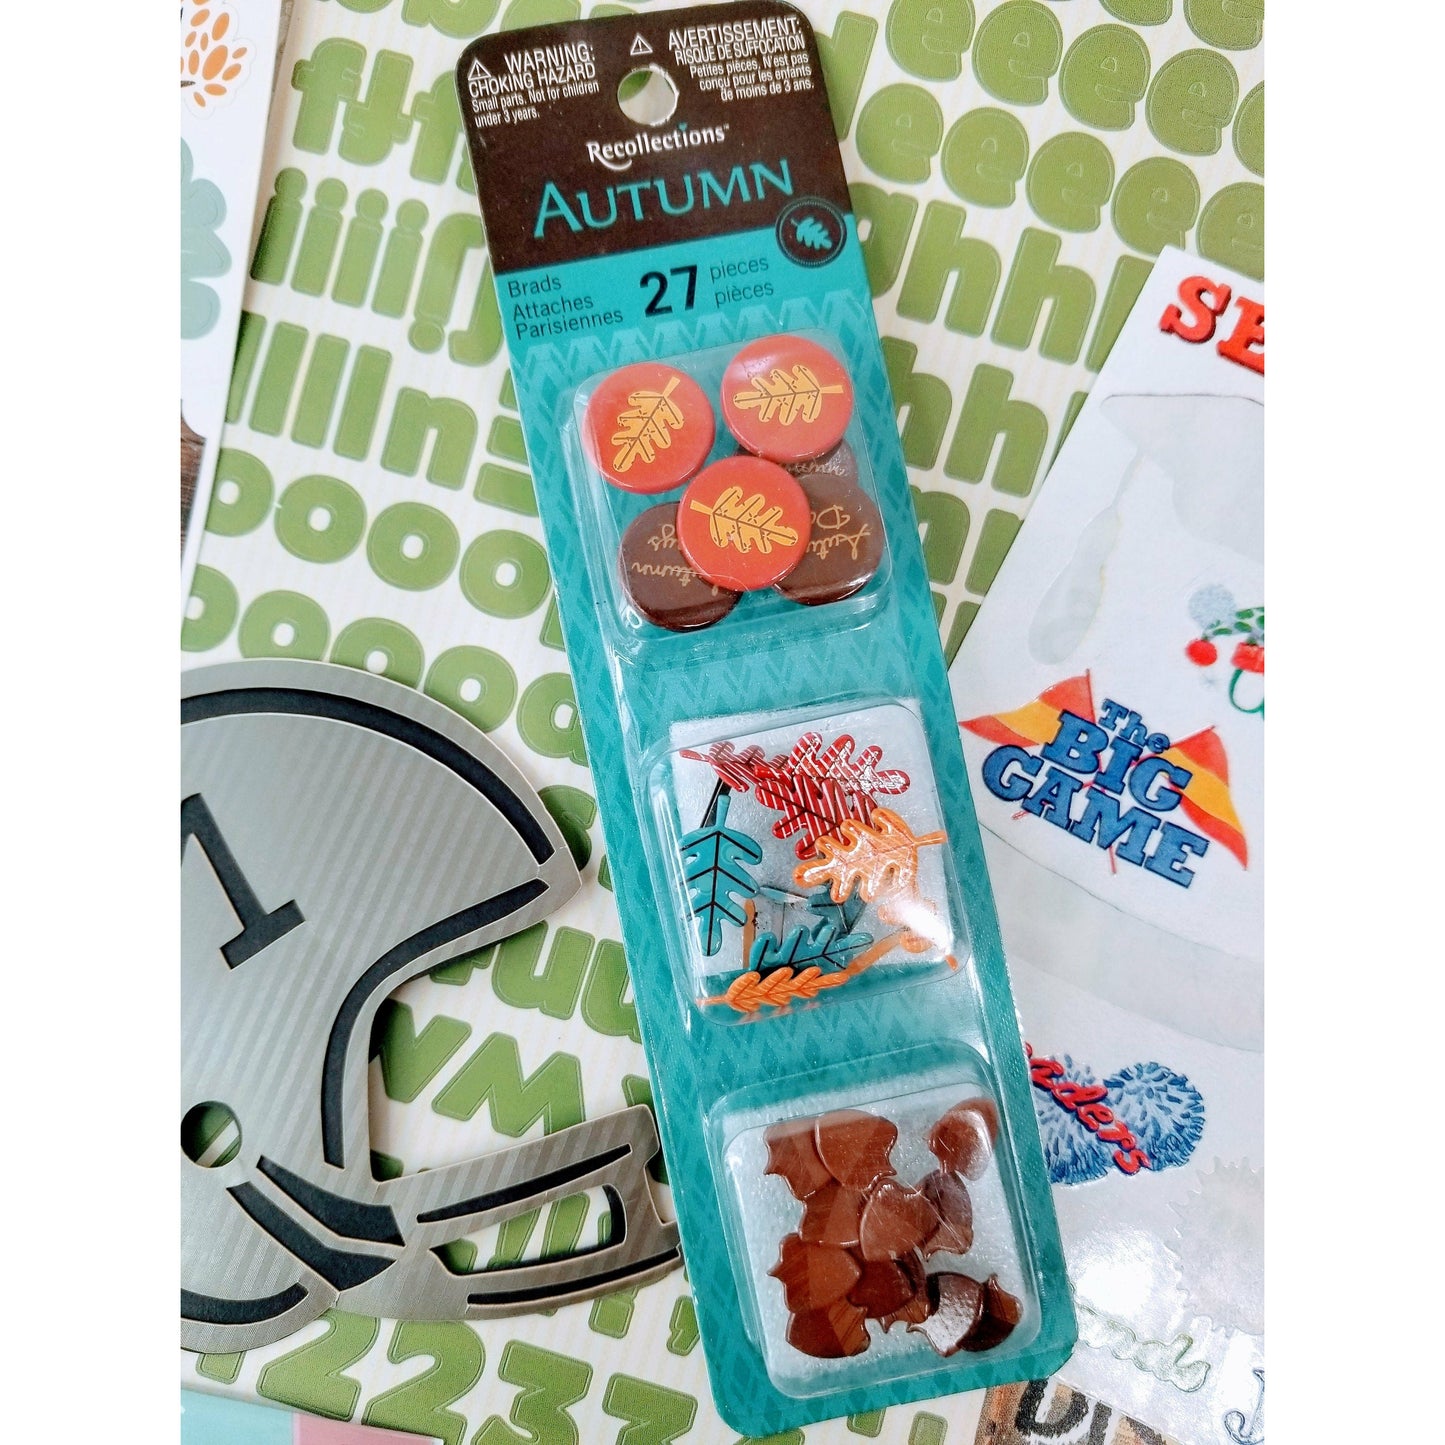 SCRAPBOOKING ~ LOT of Sports-Themed Stickers, Die Cuts, Brads, and Scrapbooking Supplies for Paper Crafts, Card-making, Scrapbooks